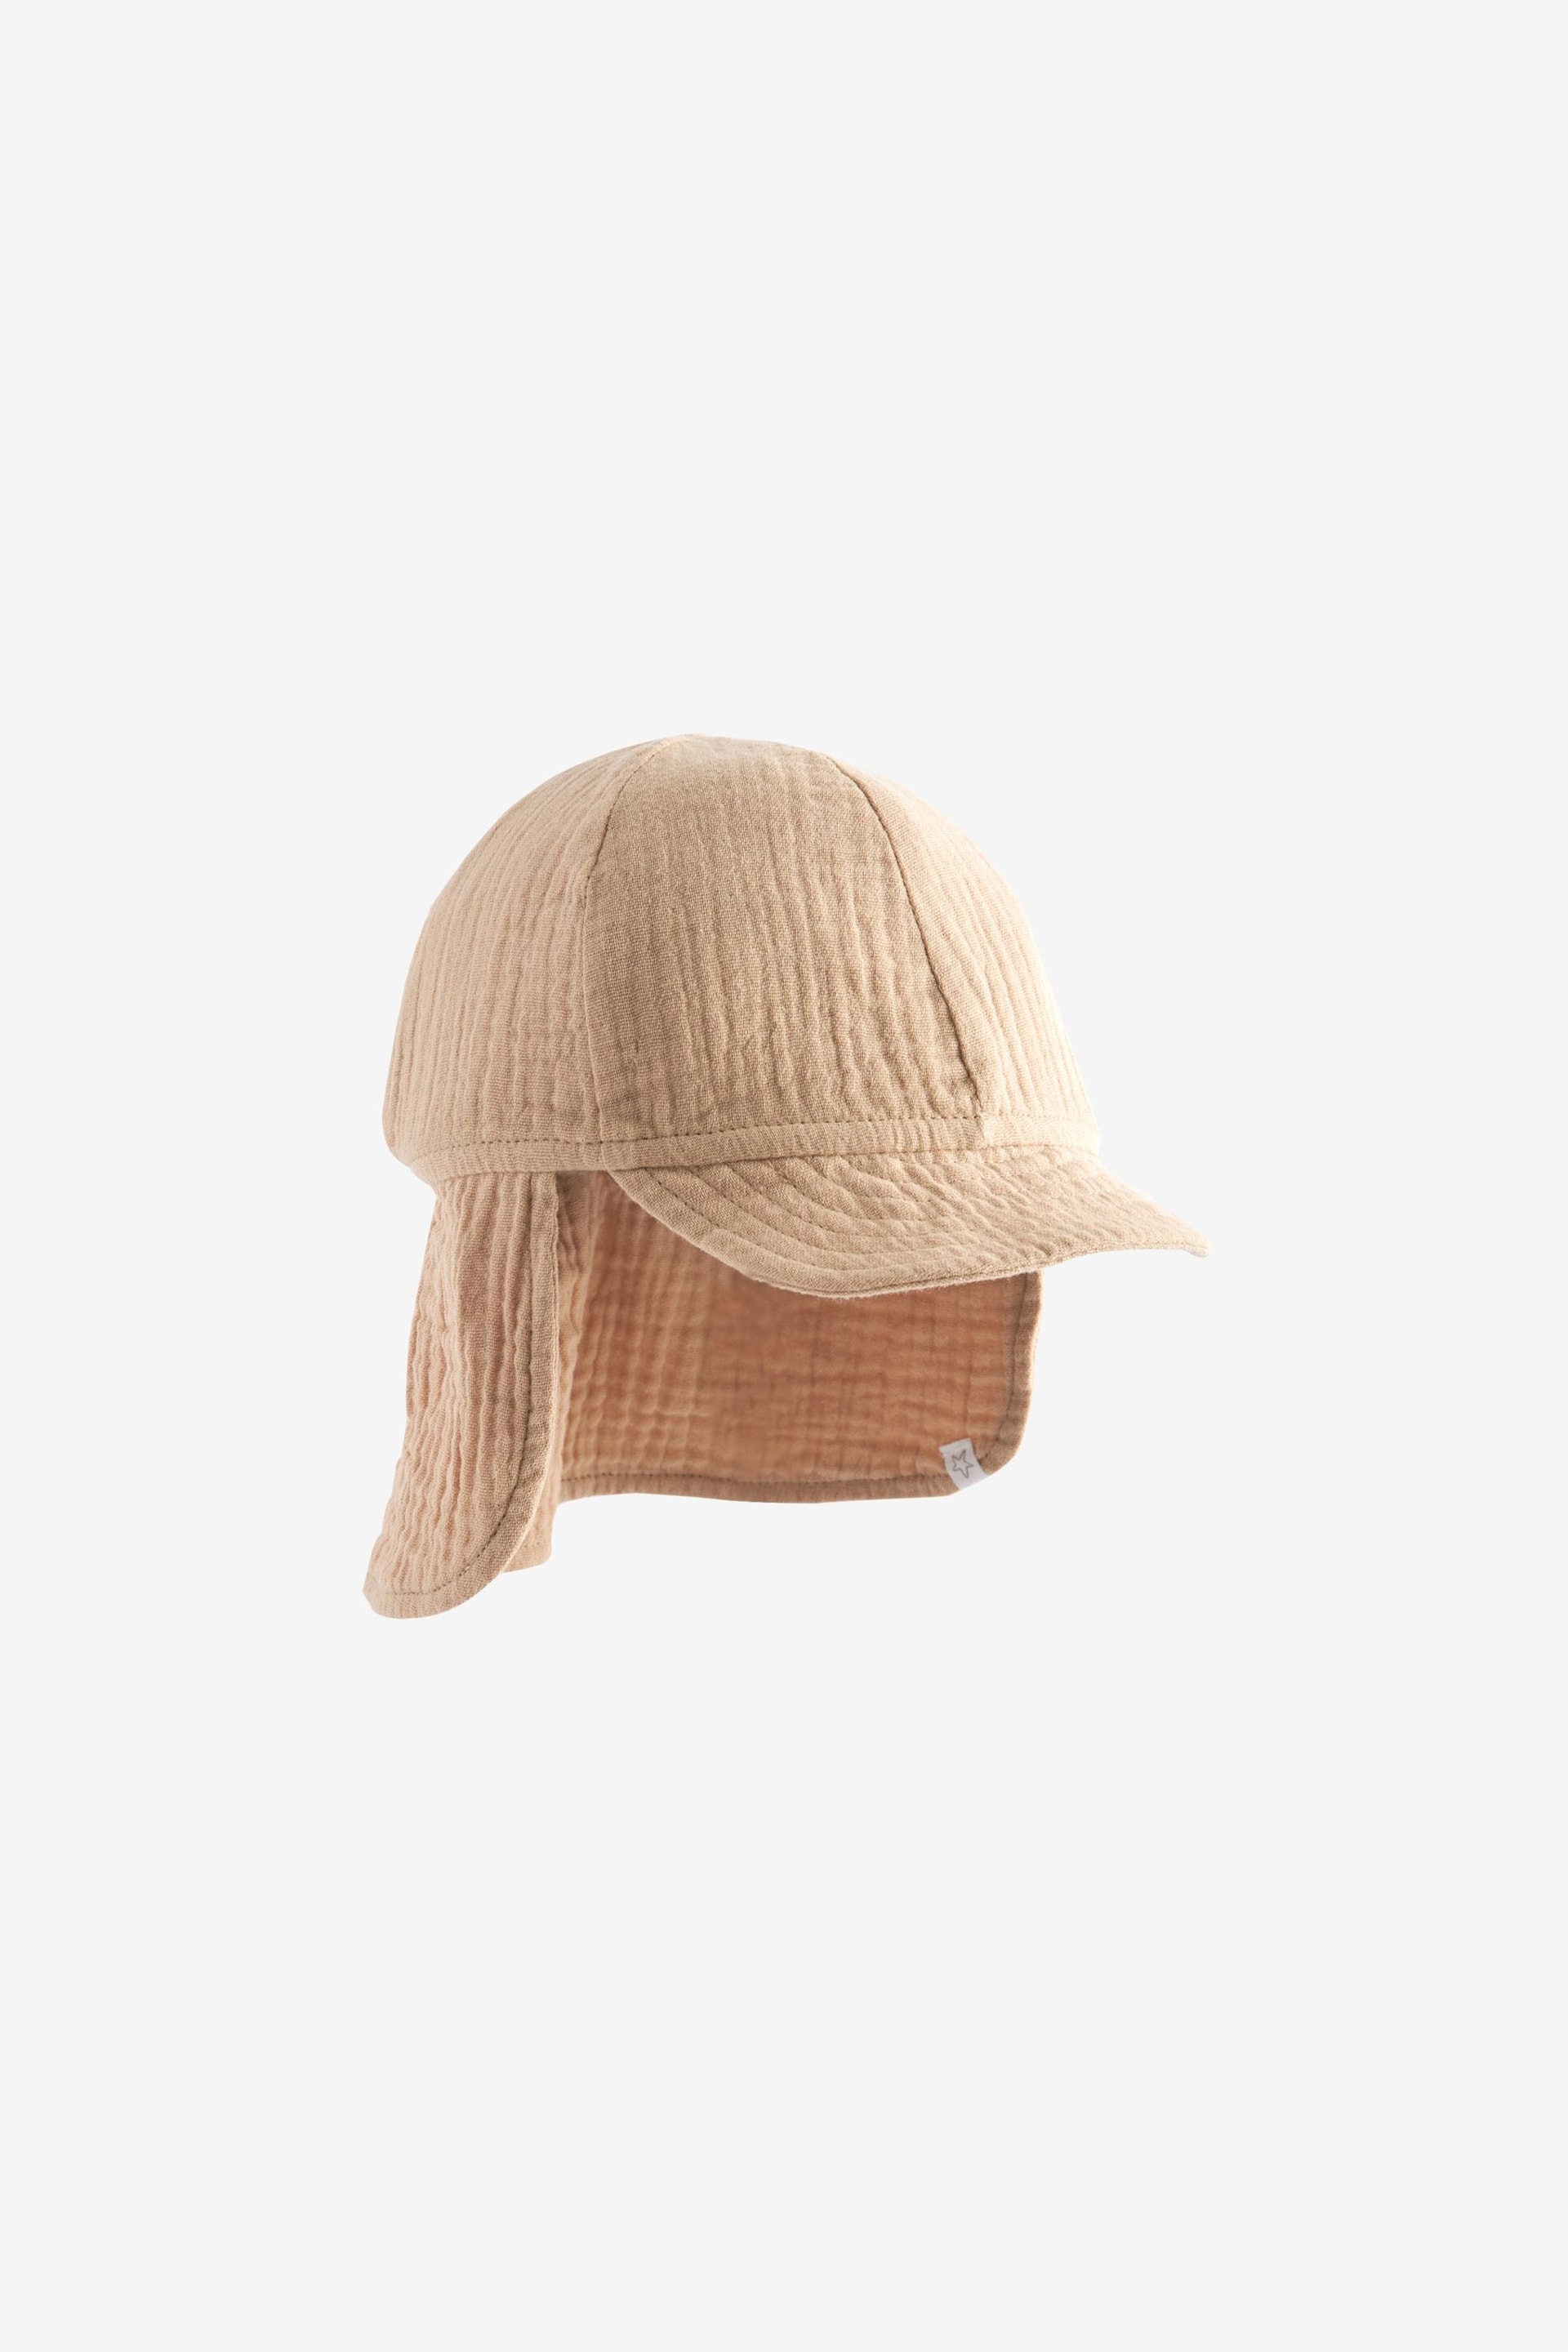 Tan Brown Crinkle Baby Legionaire Hat (0mths-2yrs) - Image 3 of 4